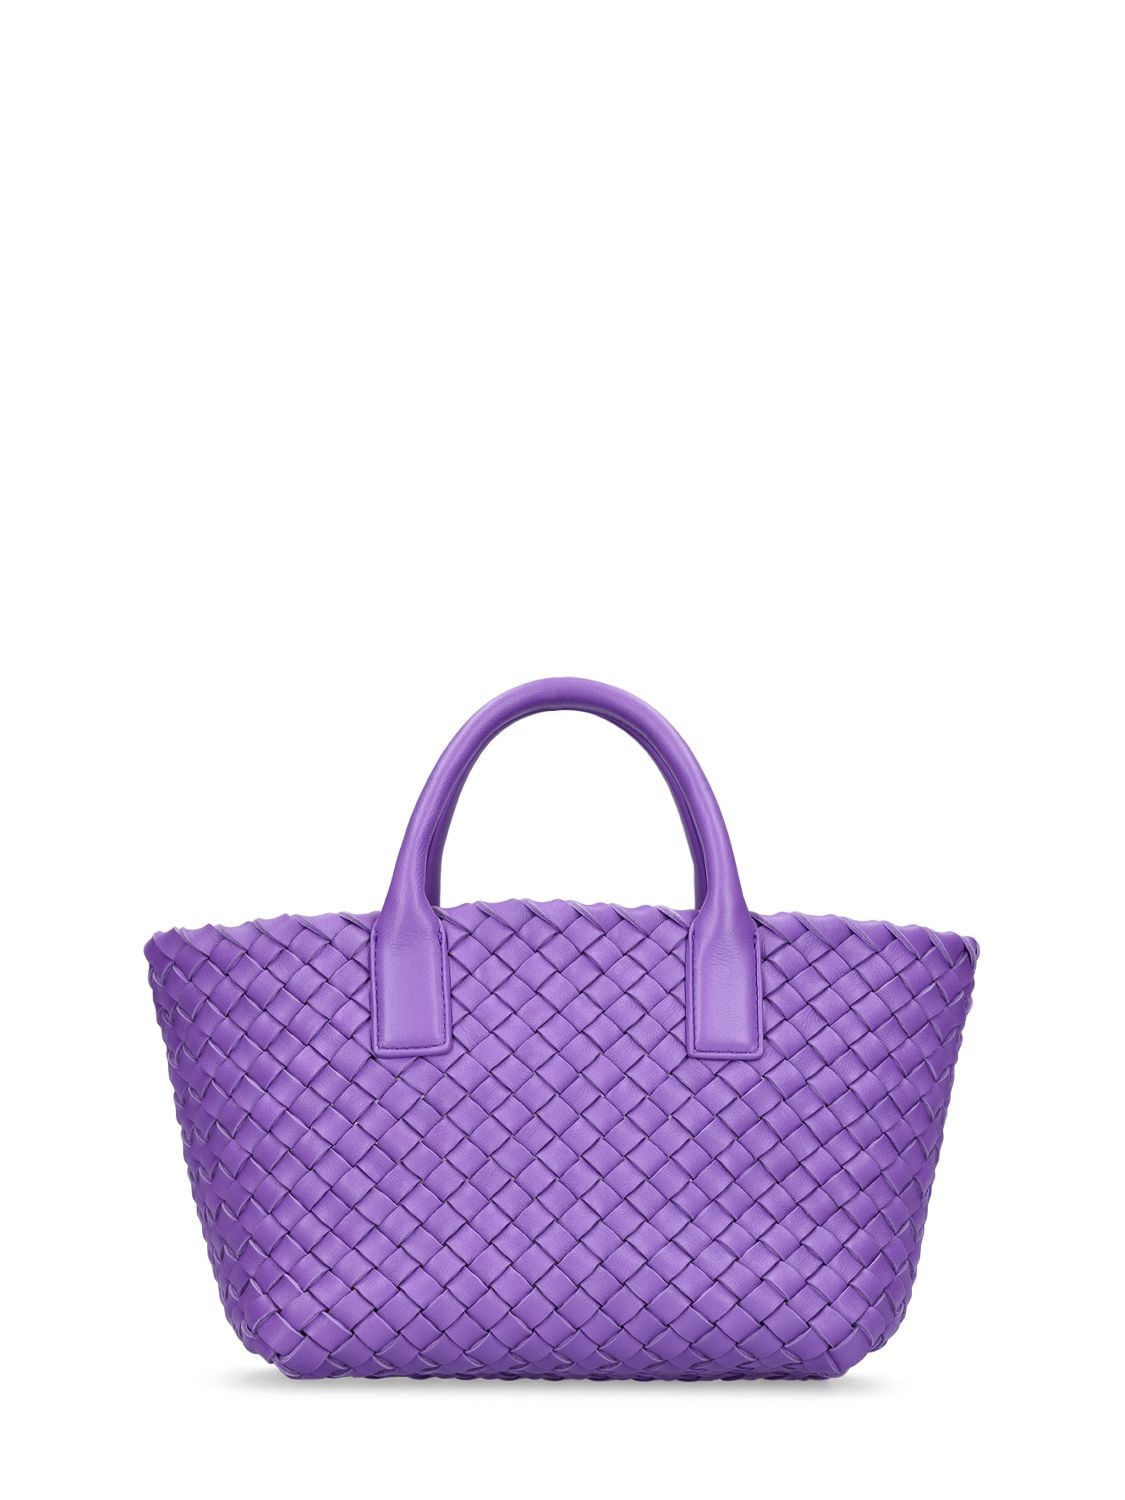 Image of Cabat Leather Tote Bag